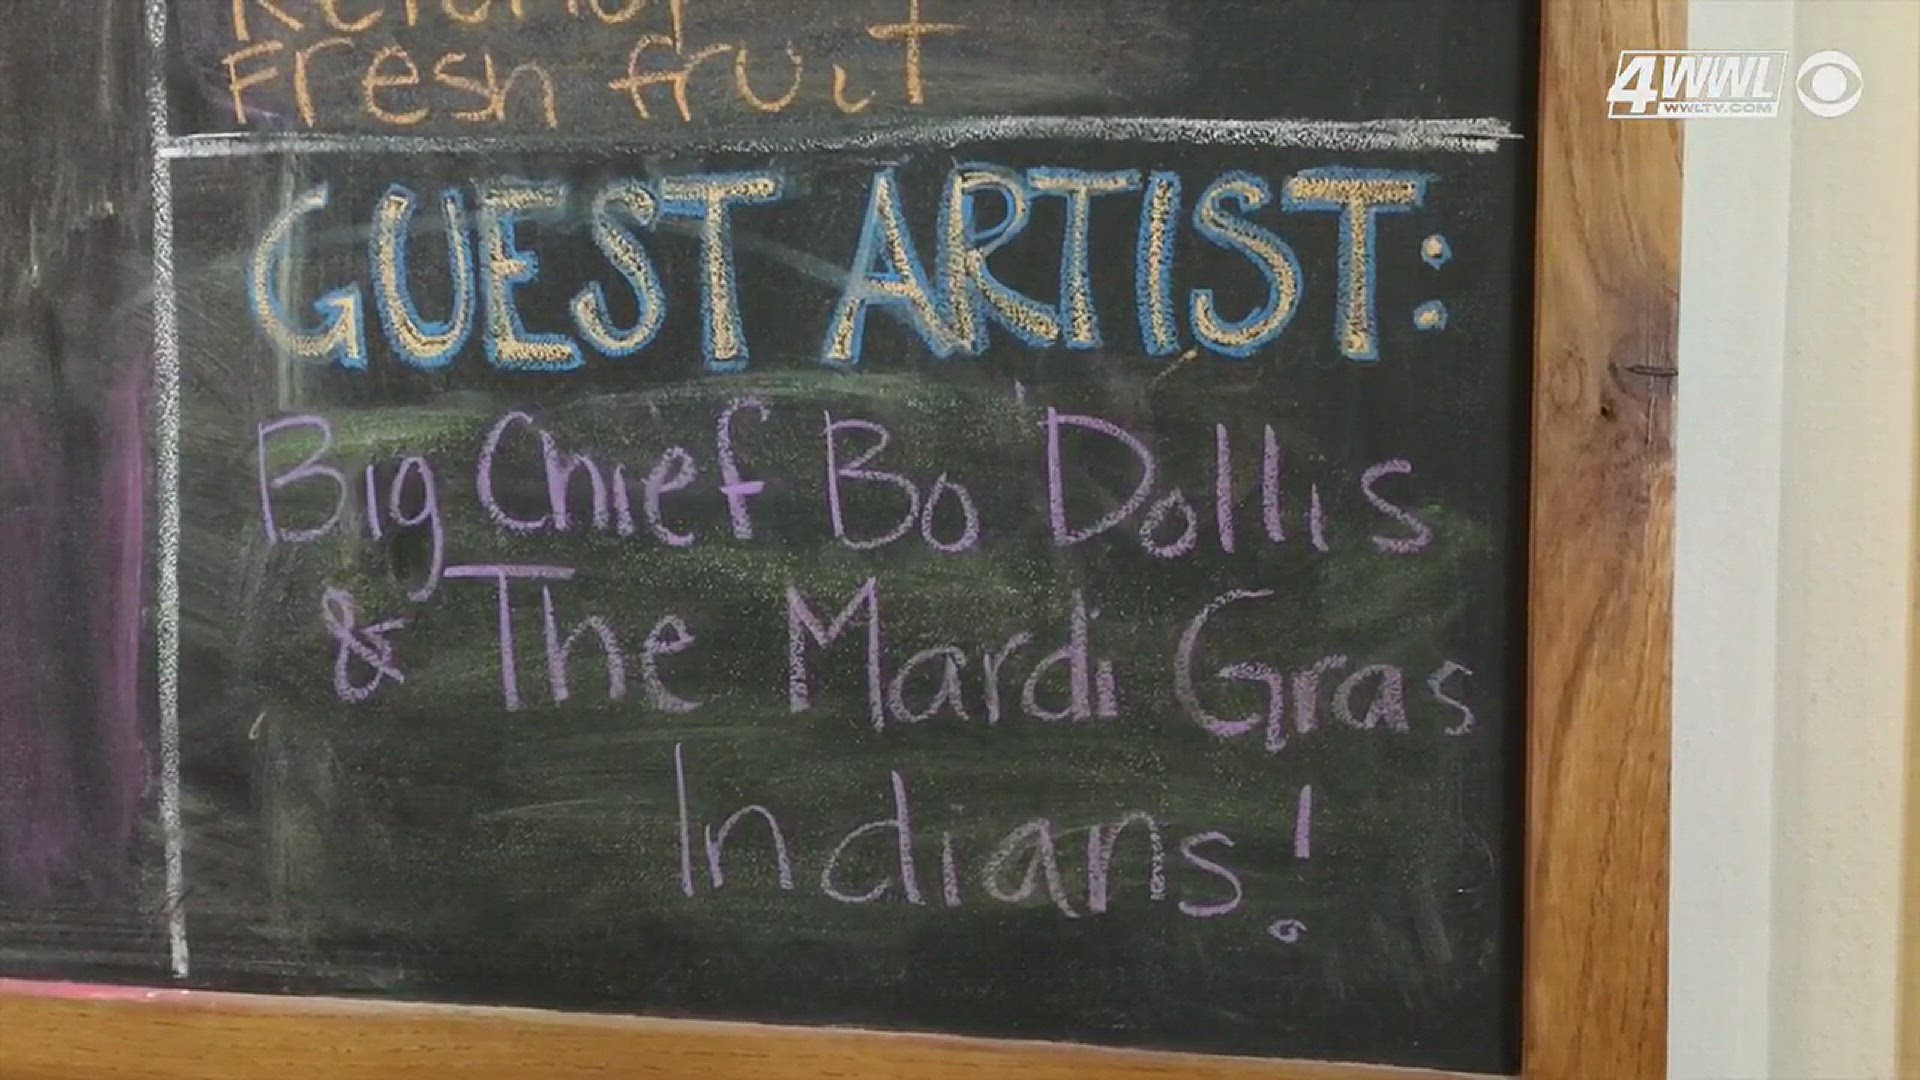 Bo Dollis, Jr. taught a group of campers about Mardi Gras Indian traditions.